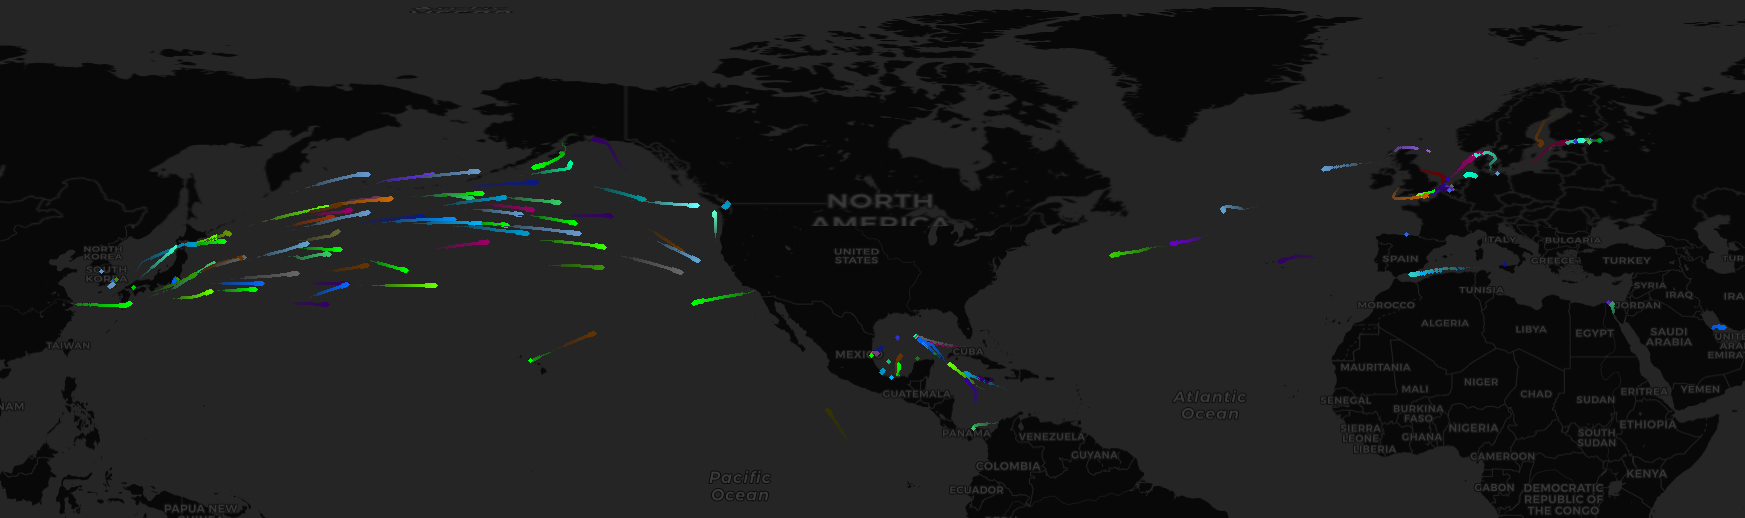 1 week historical AIS for vessels having a declared destination port within the US